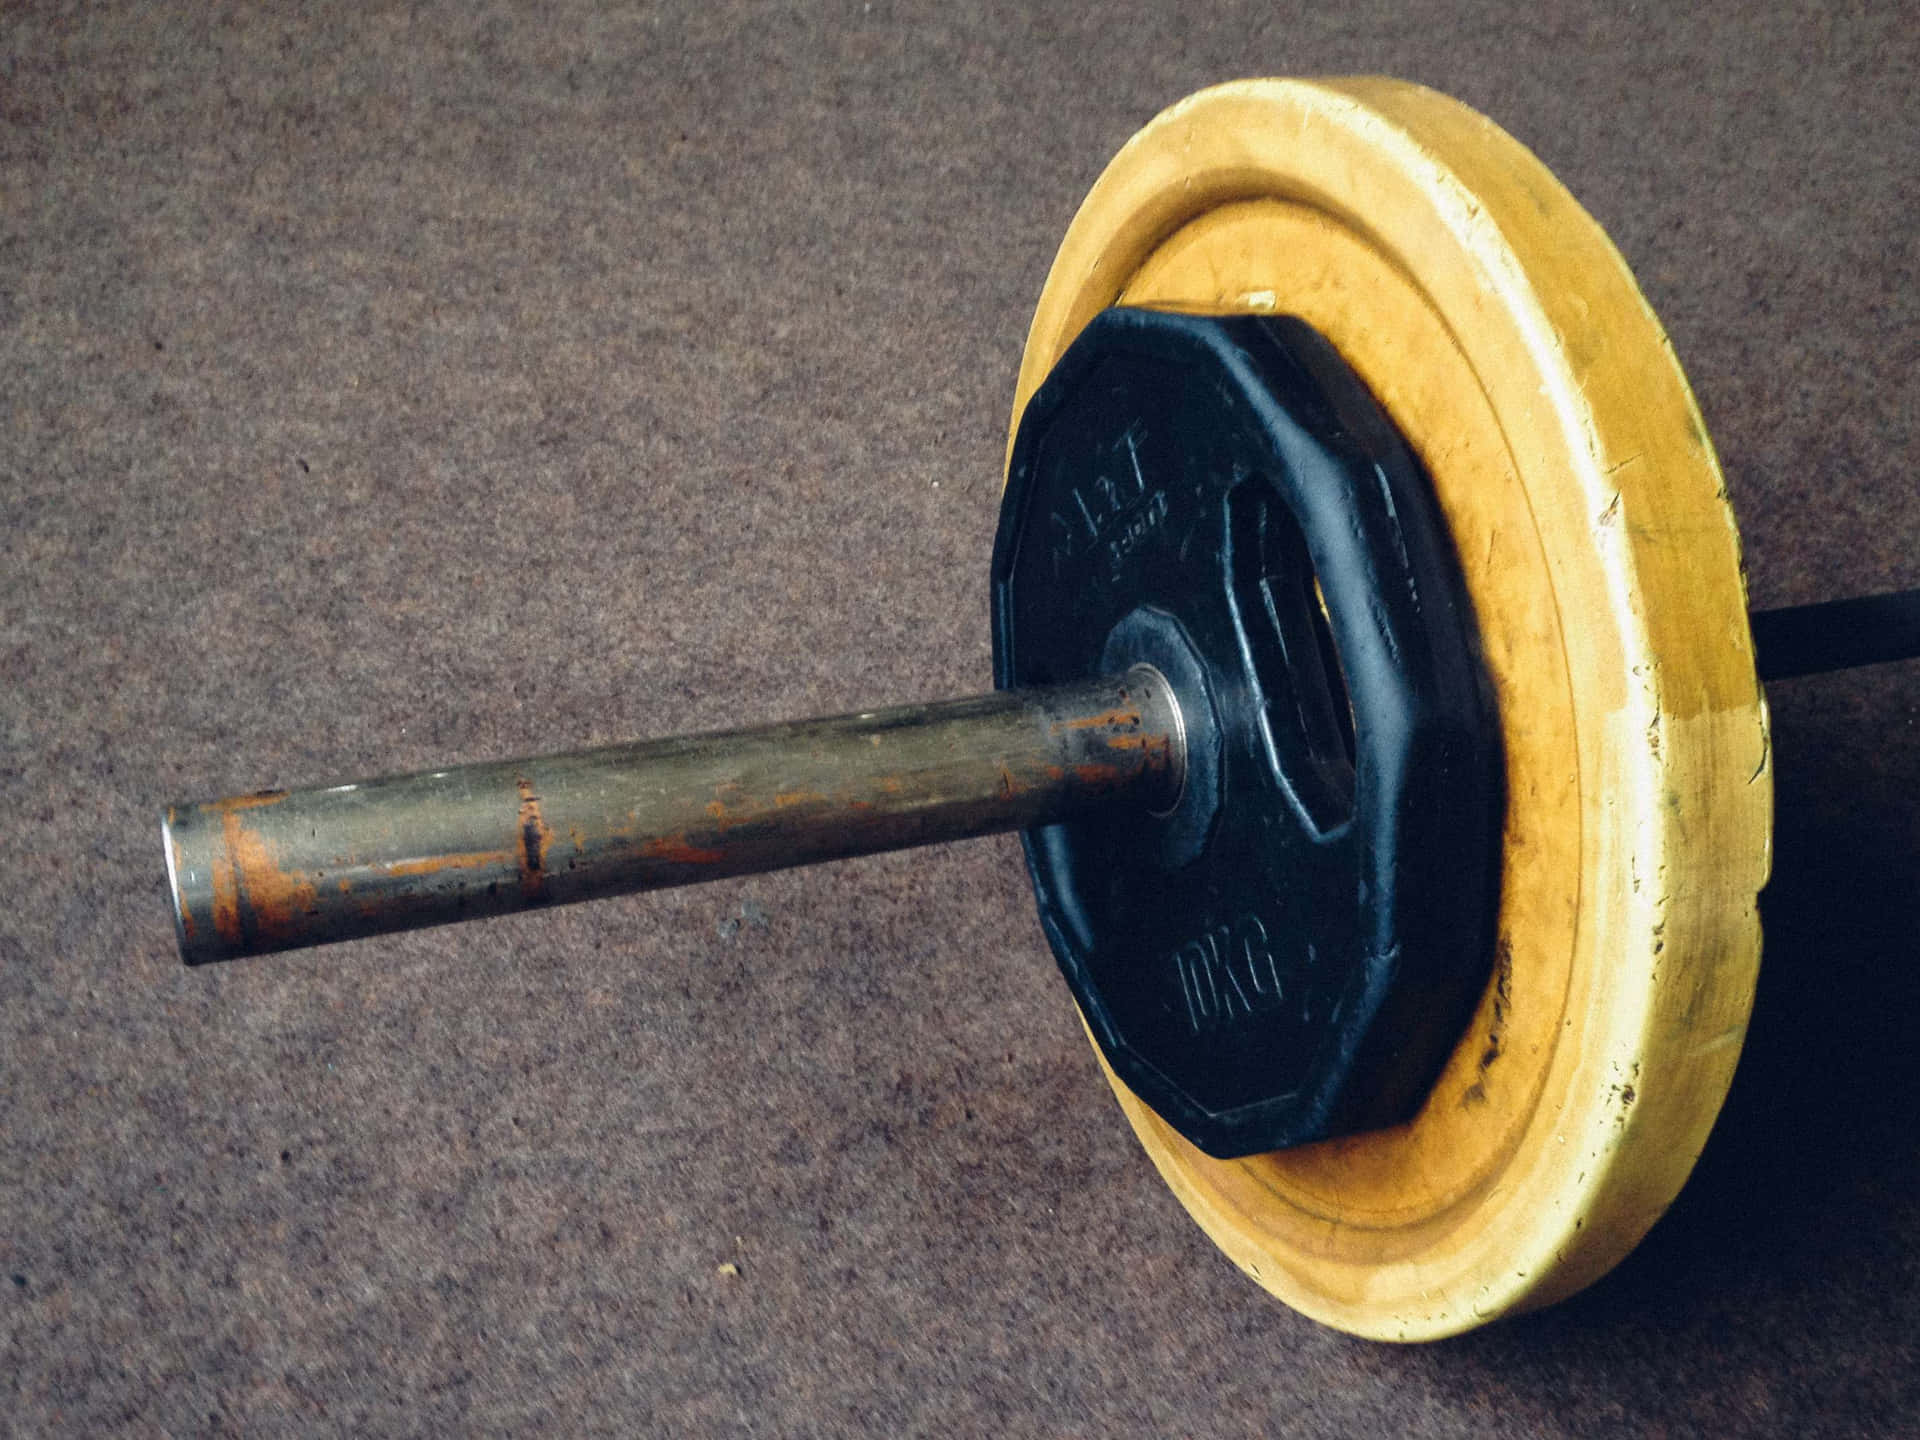 Working up a sweat with Barbell